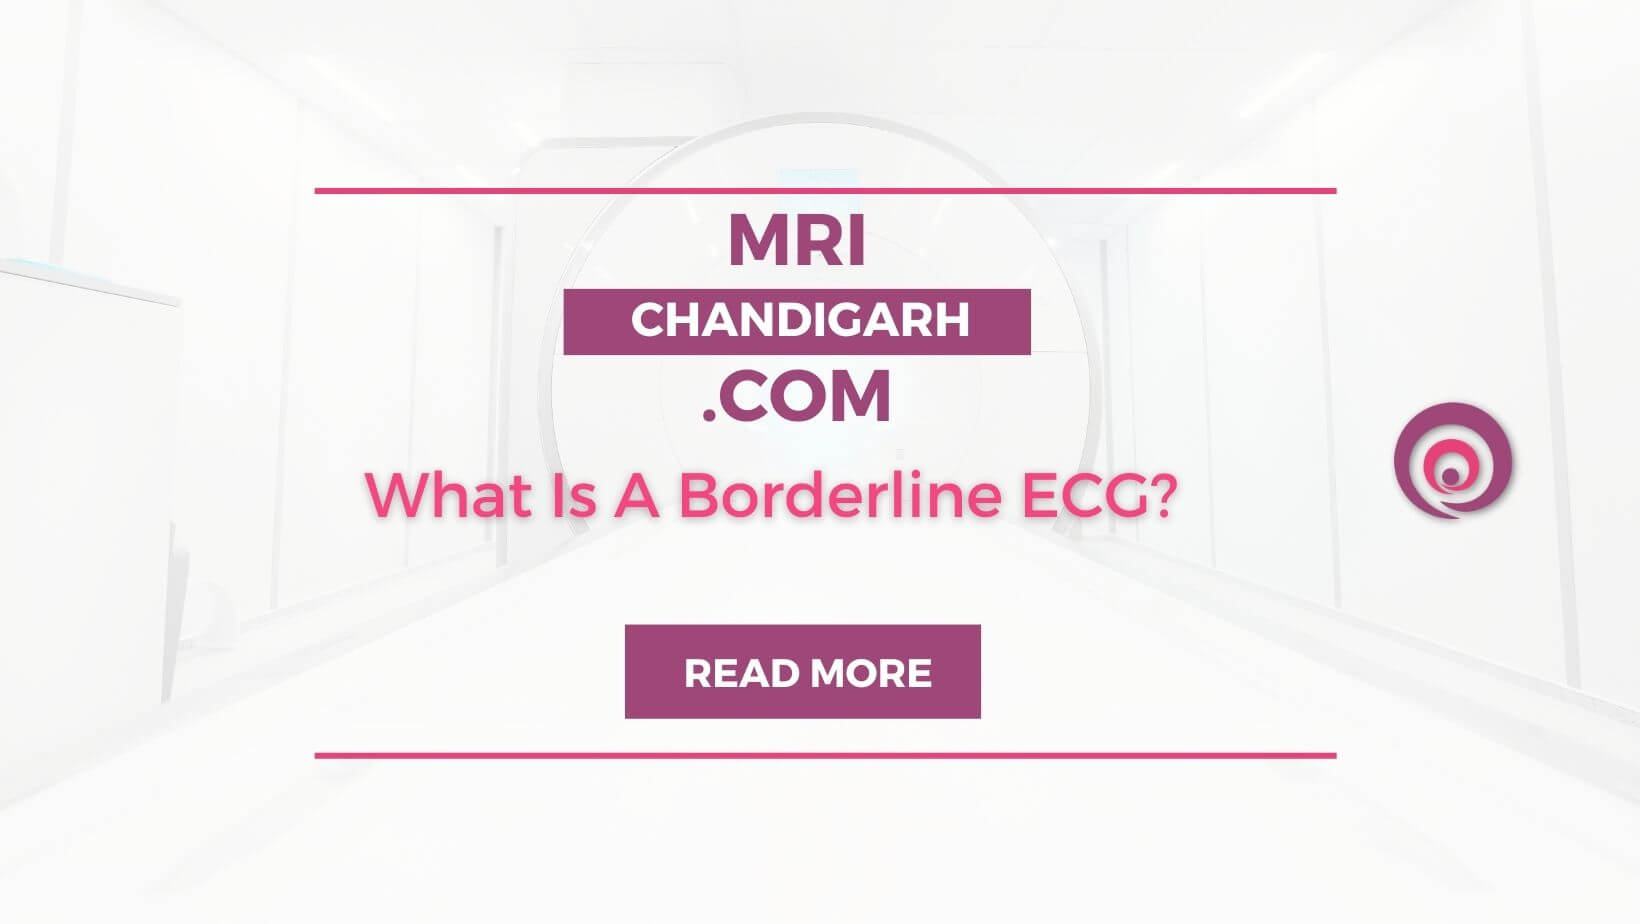 What Is A Borderline ECG?